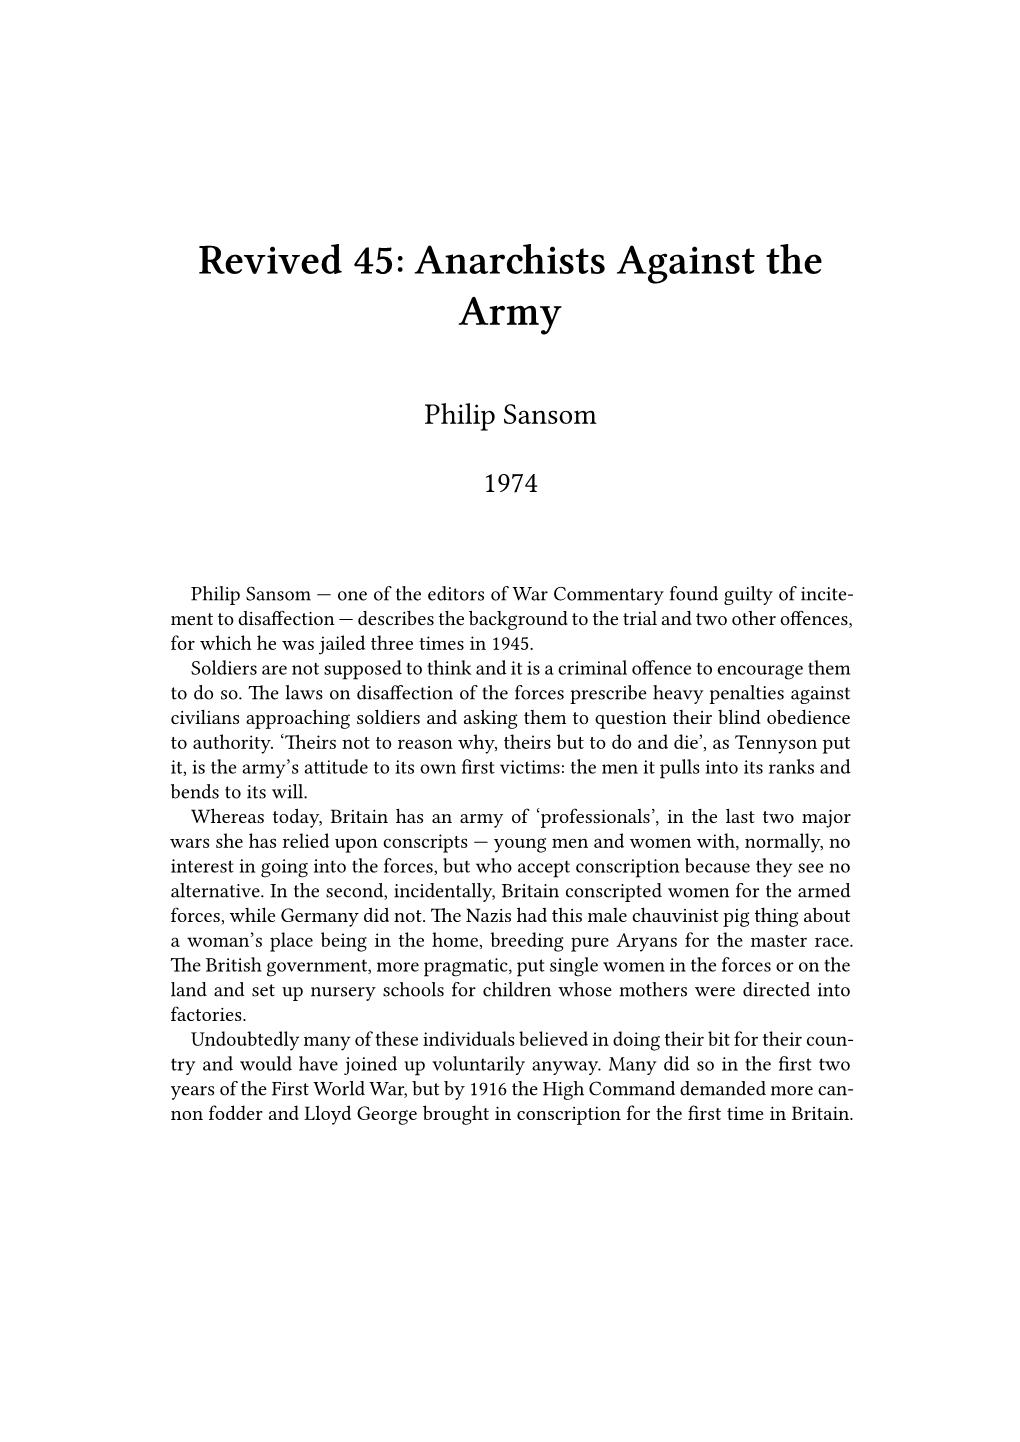 Revived 45: Anarchists Against the Army